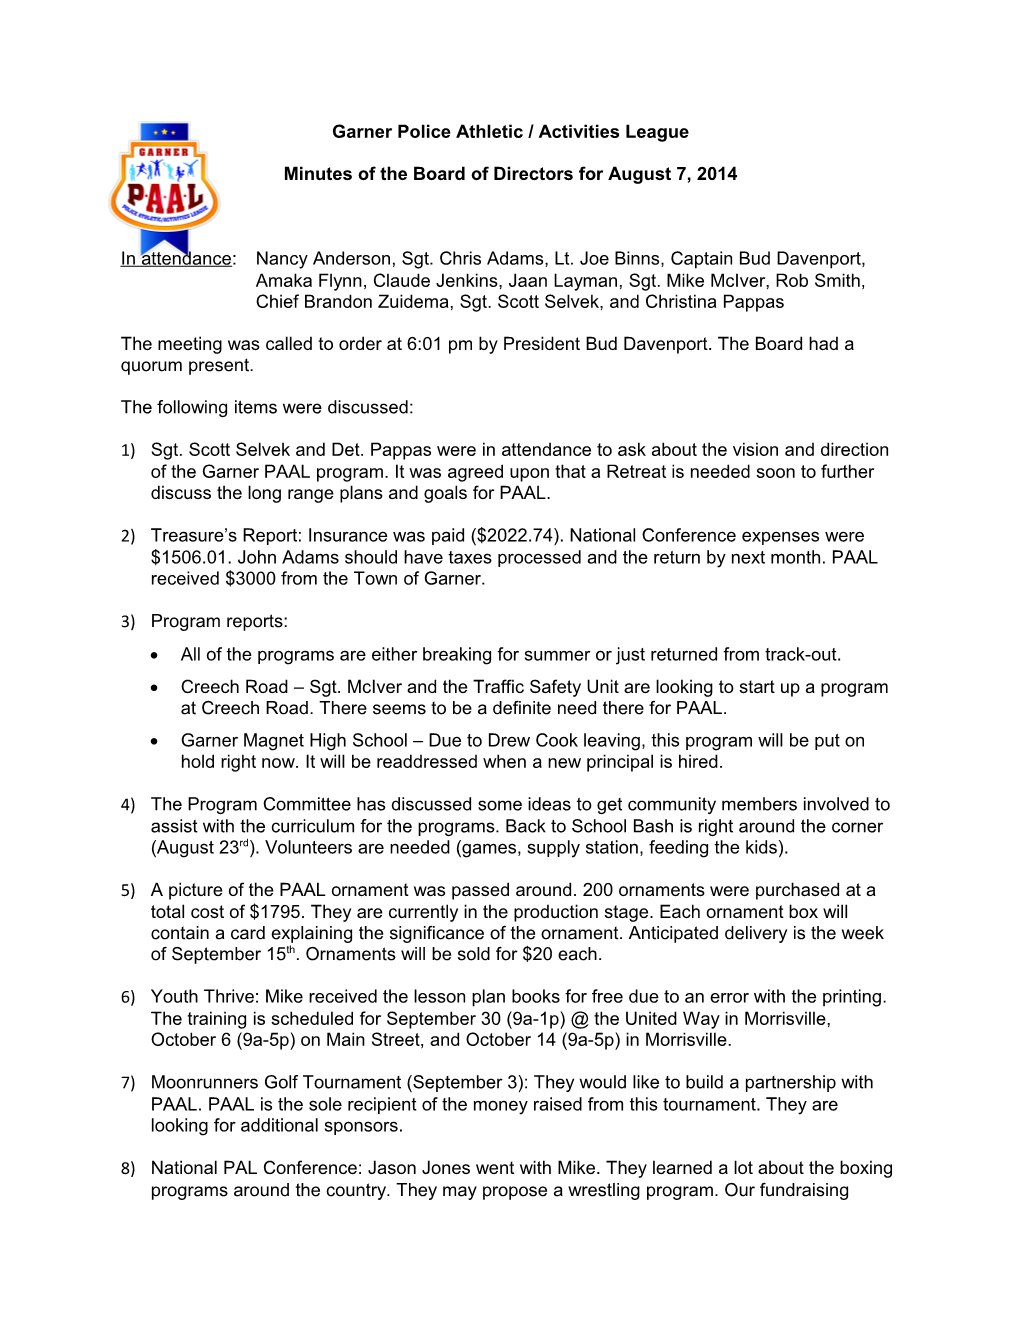 Minutes of the Board of Directors for August 7, 2014